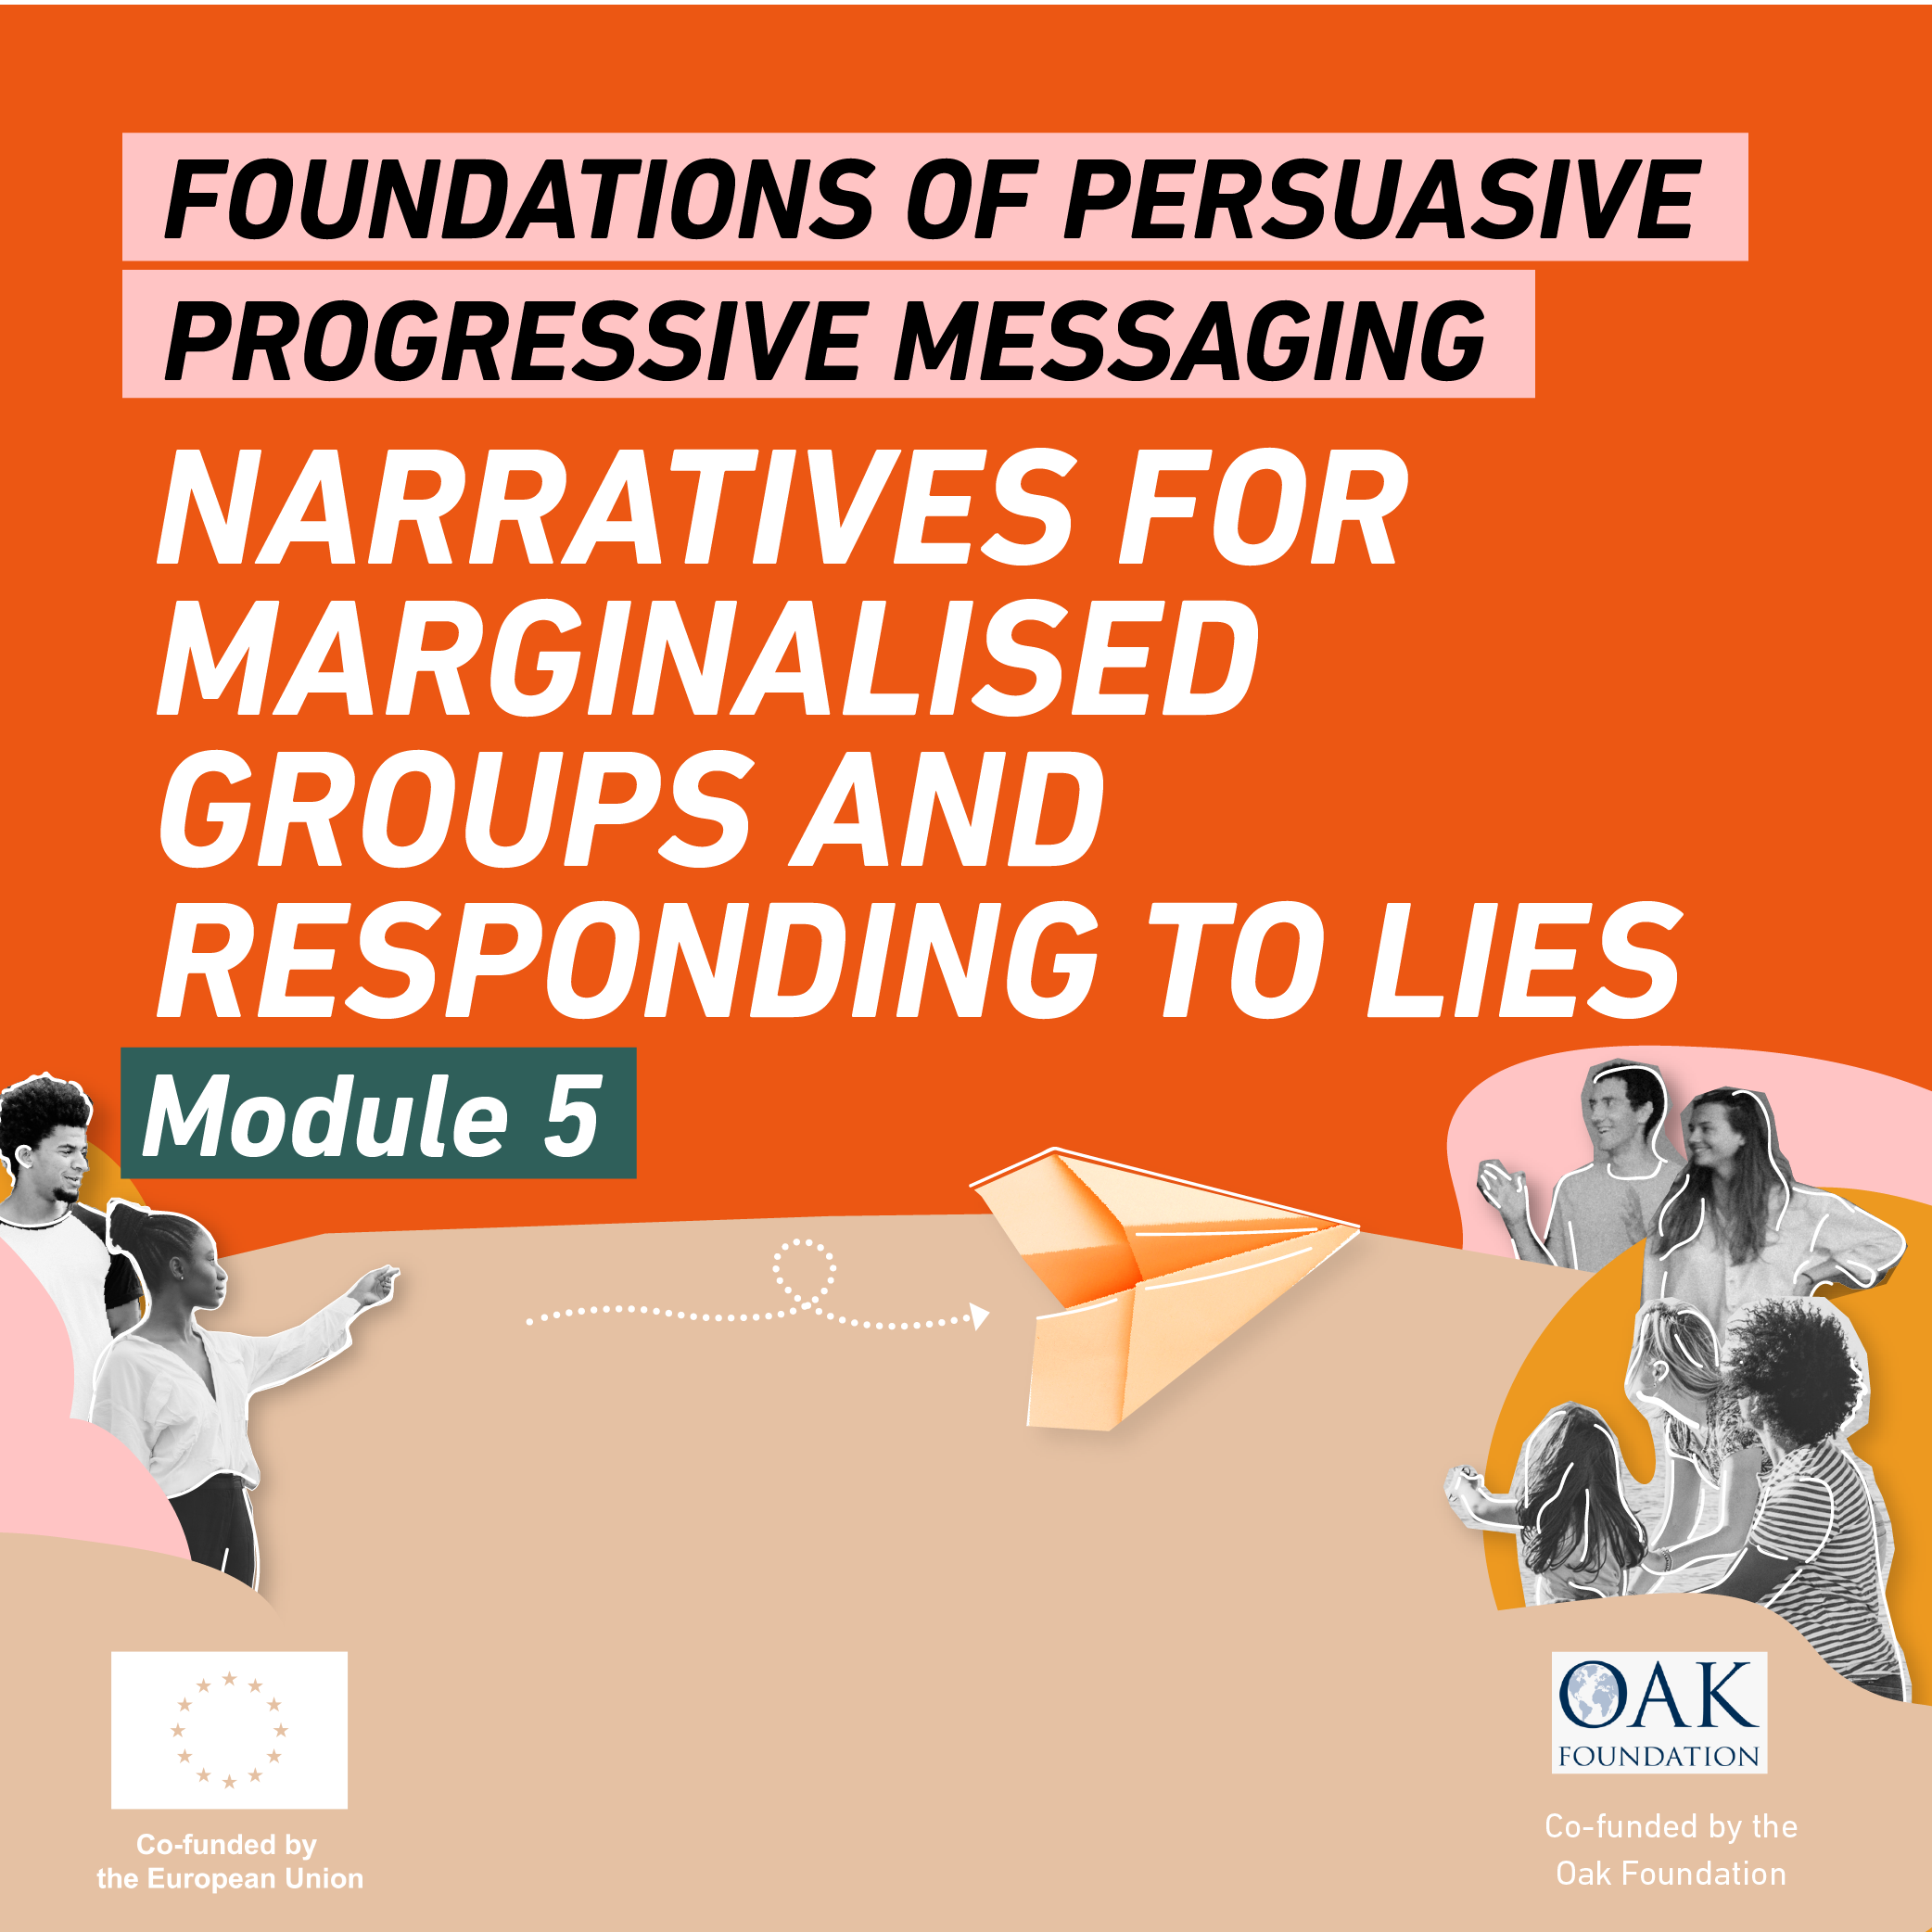 Foundations of Persuasive Progressive Messaging - Module 5 of 7: Narratives for marginalised groups and responding to lies LIB006